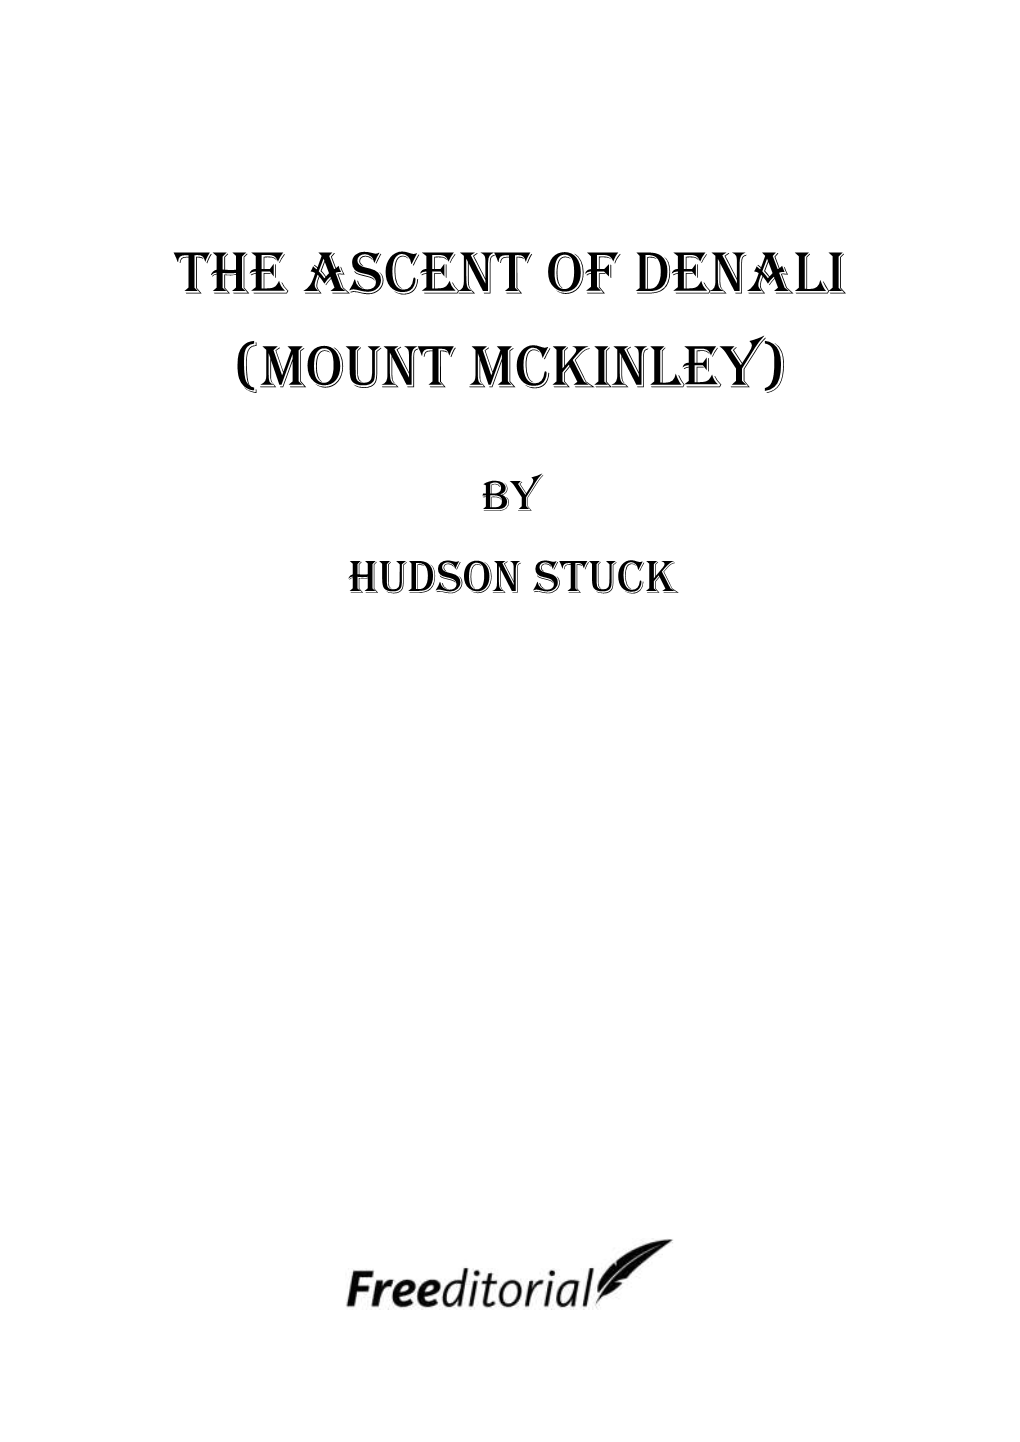 The Ascent of Denali (Mount Mckinley)